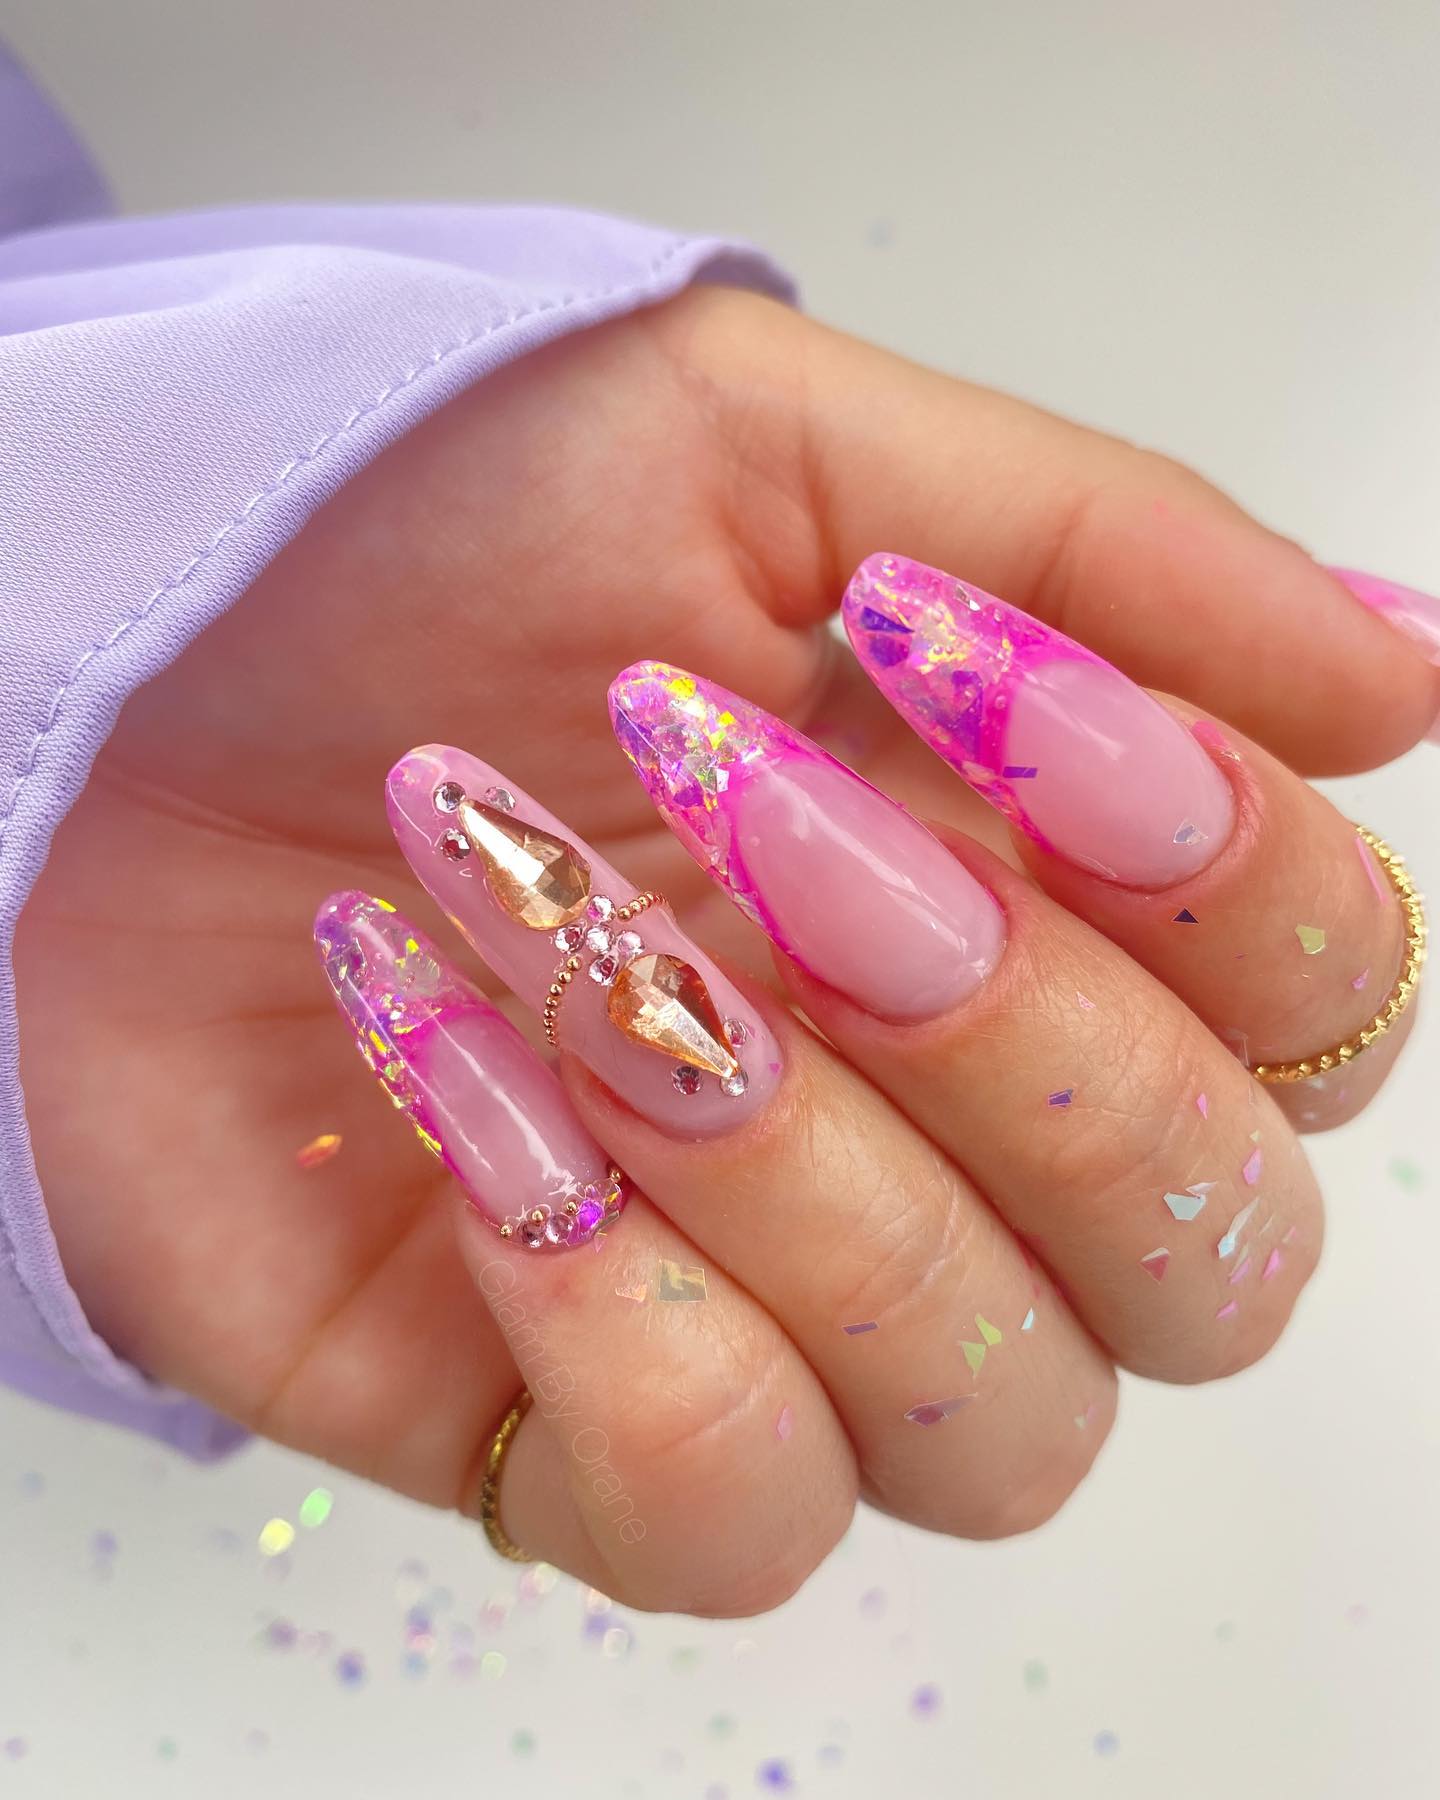 If you like gemstones and glitter this manicure will suit you. Show that you know how to rock bling oval nails and that pink is your favorite shade as well.